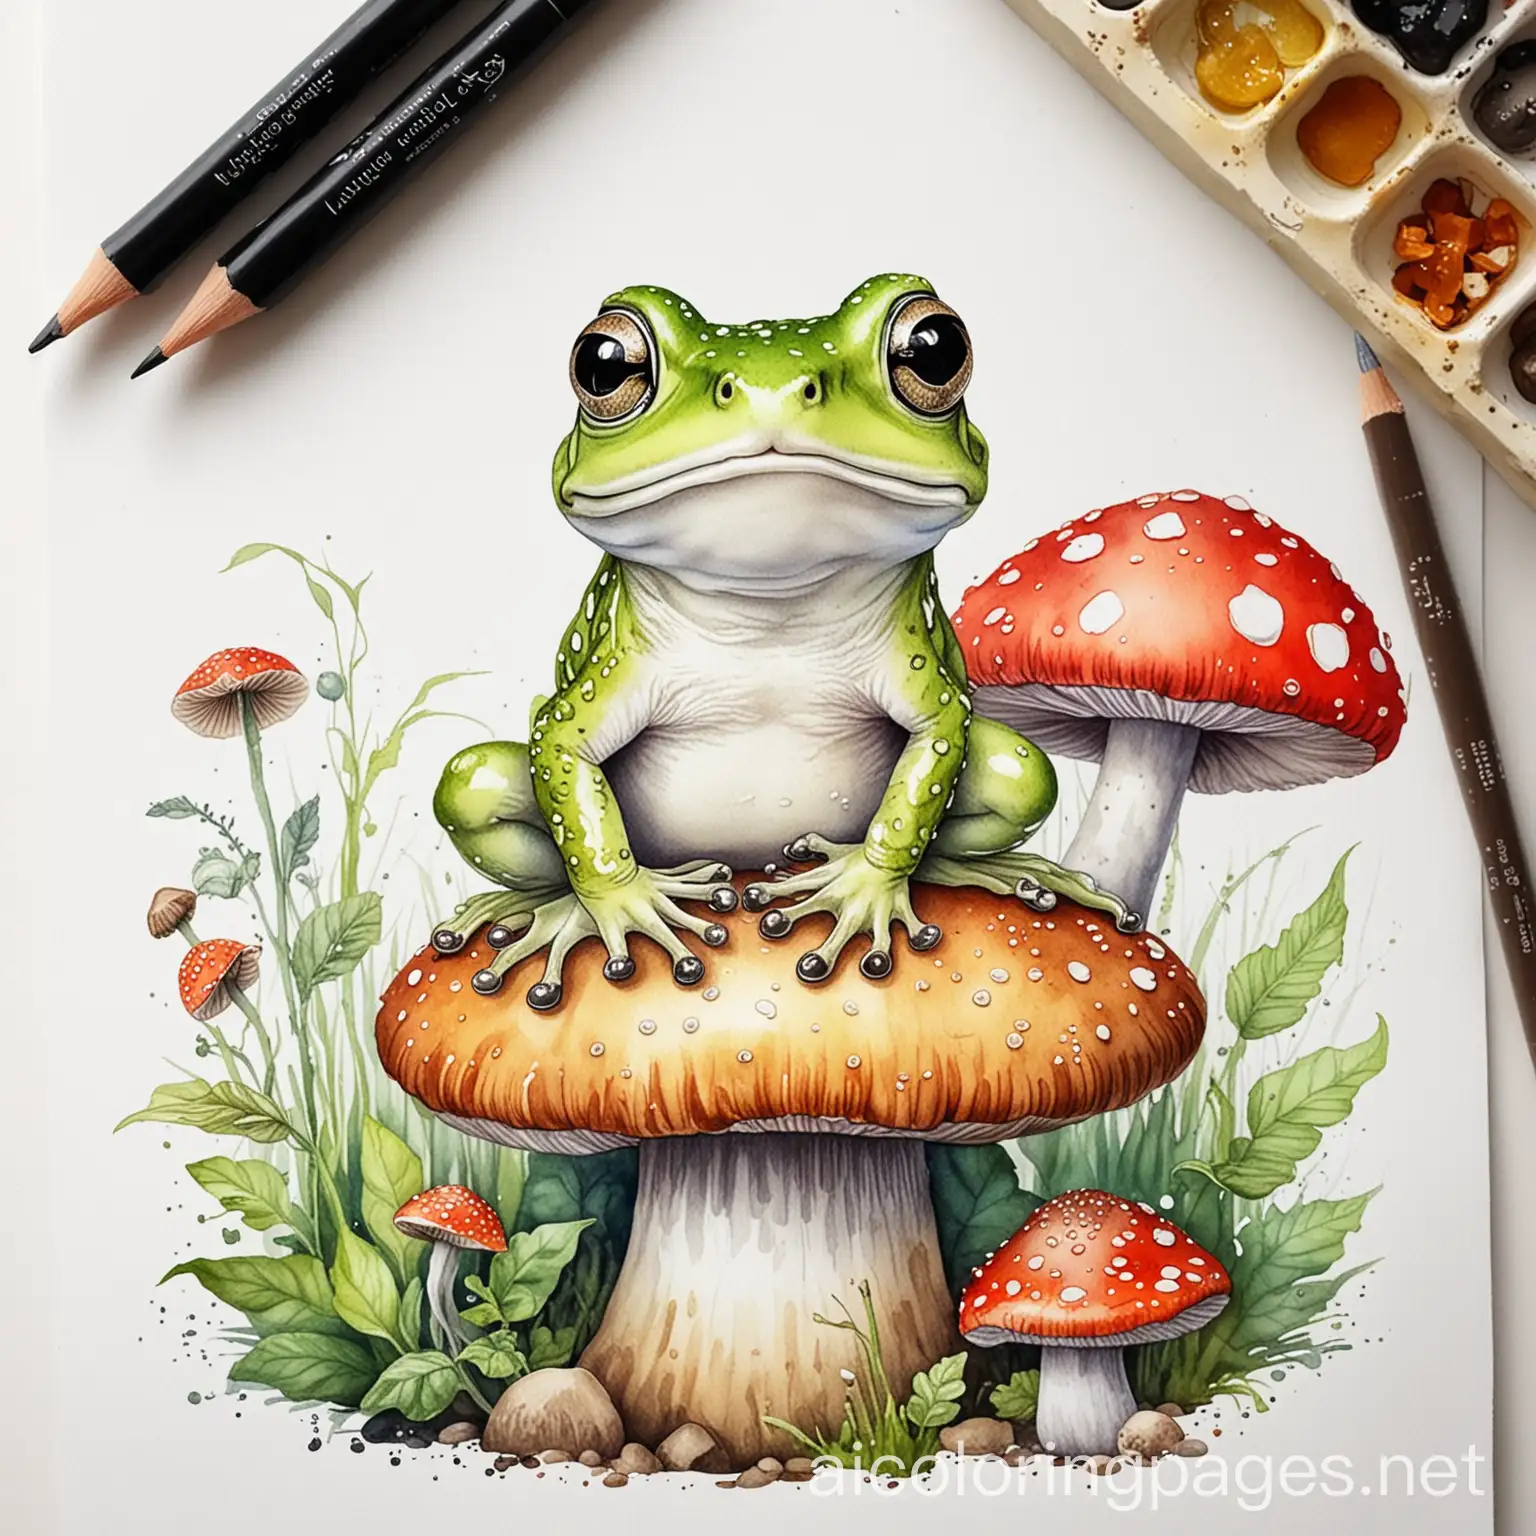 Adorable-Frog-on-Mushroom-Watercolor-Illustration-for-Coloring-Page